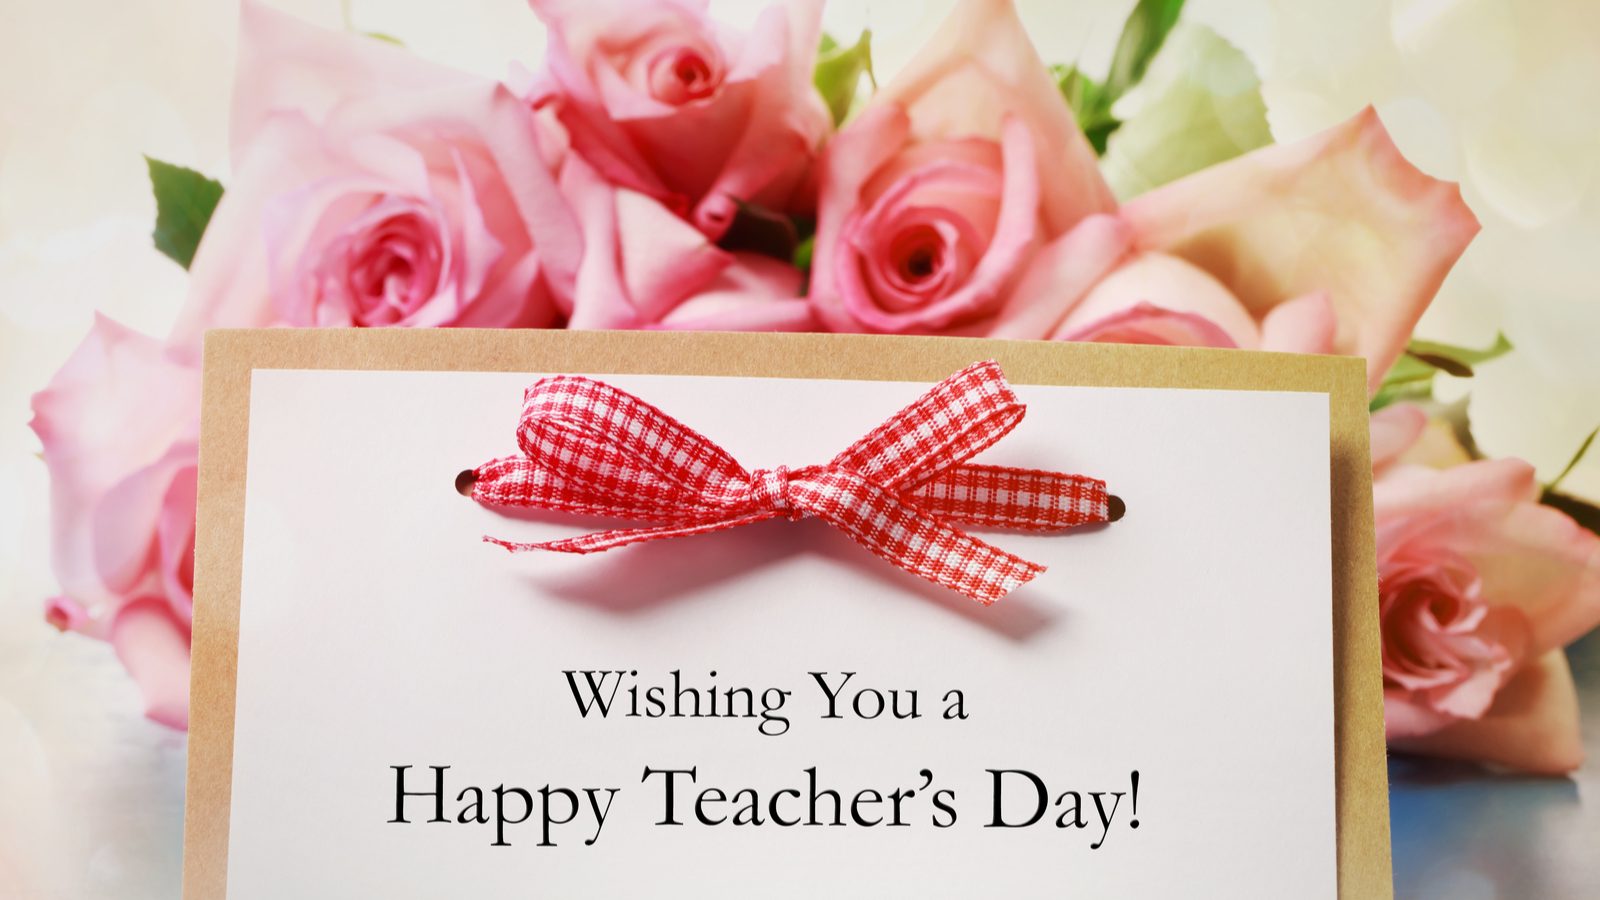 Teachers' Day 2021: Surprise Your Teacher with These Amazing Gift Ideas